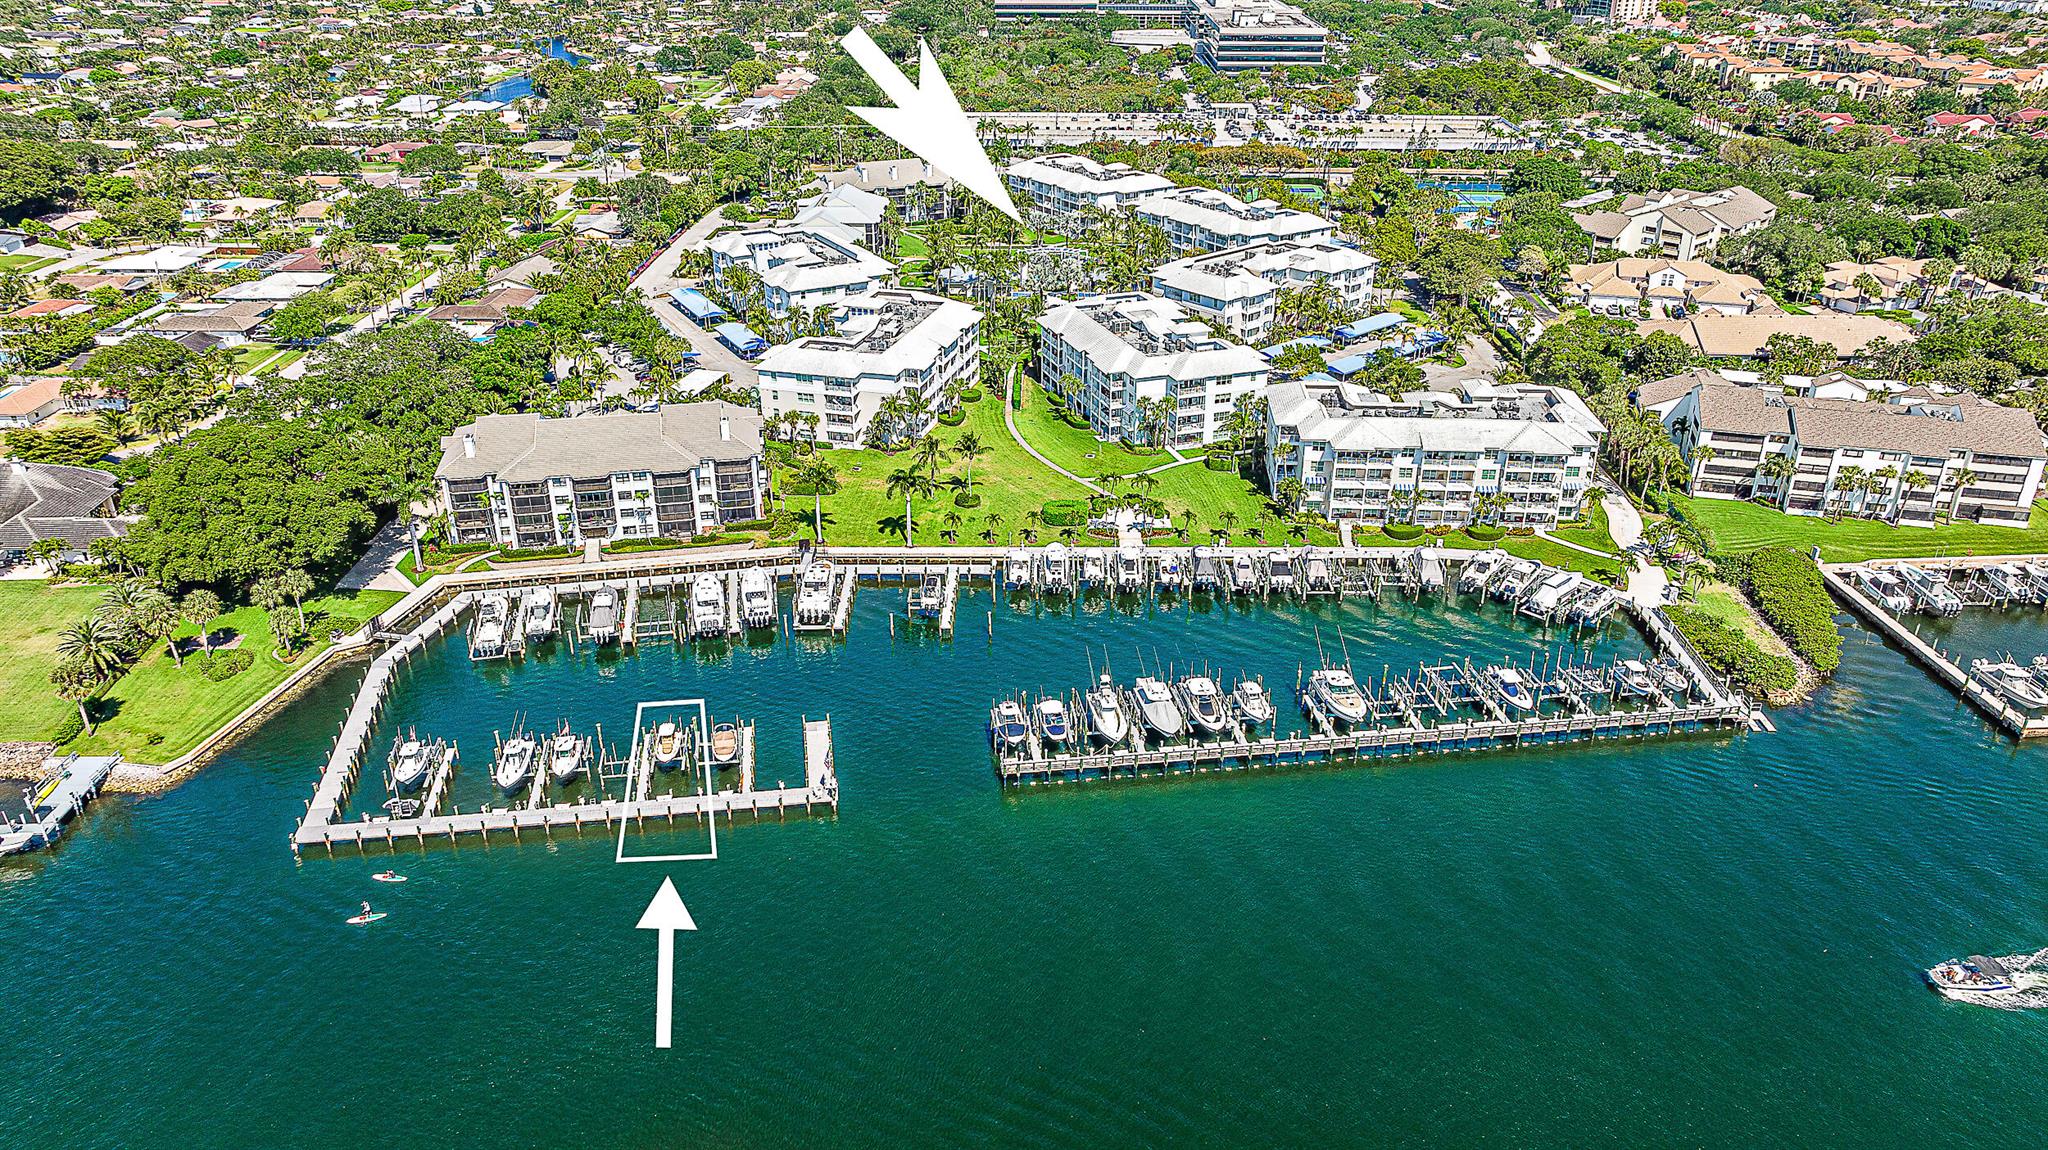 Welcome to your stunning Juno Beach condo with a deeded 40ft boat slip! Nestled directly on the Intracoastal, your slip already comes equipped with a 12,000 lb. boat lift! The condo was built in 2016 and is conveniently located on the first floor. This is a pet friendly building with fabulous amenities, including a pool, spa, fitness center, tennis, pickleball, and more! Located minutes to the beach, and all the best shopping and dining!